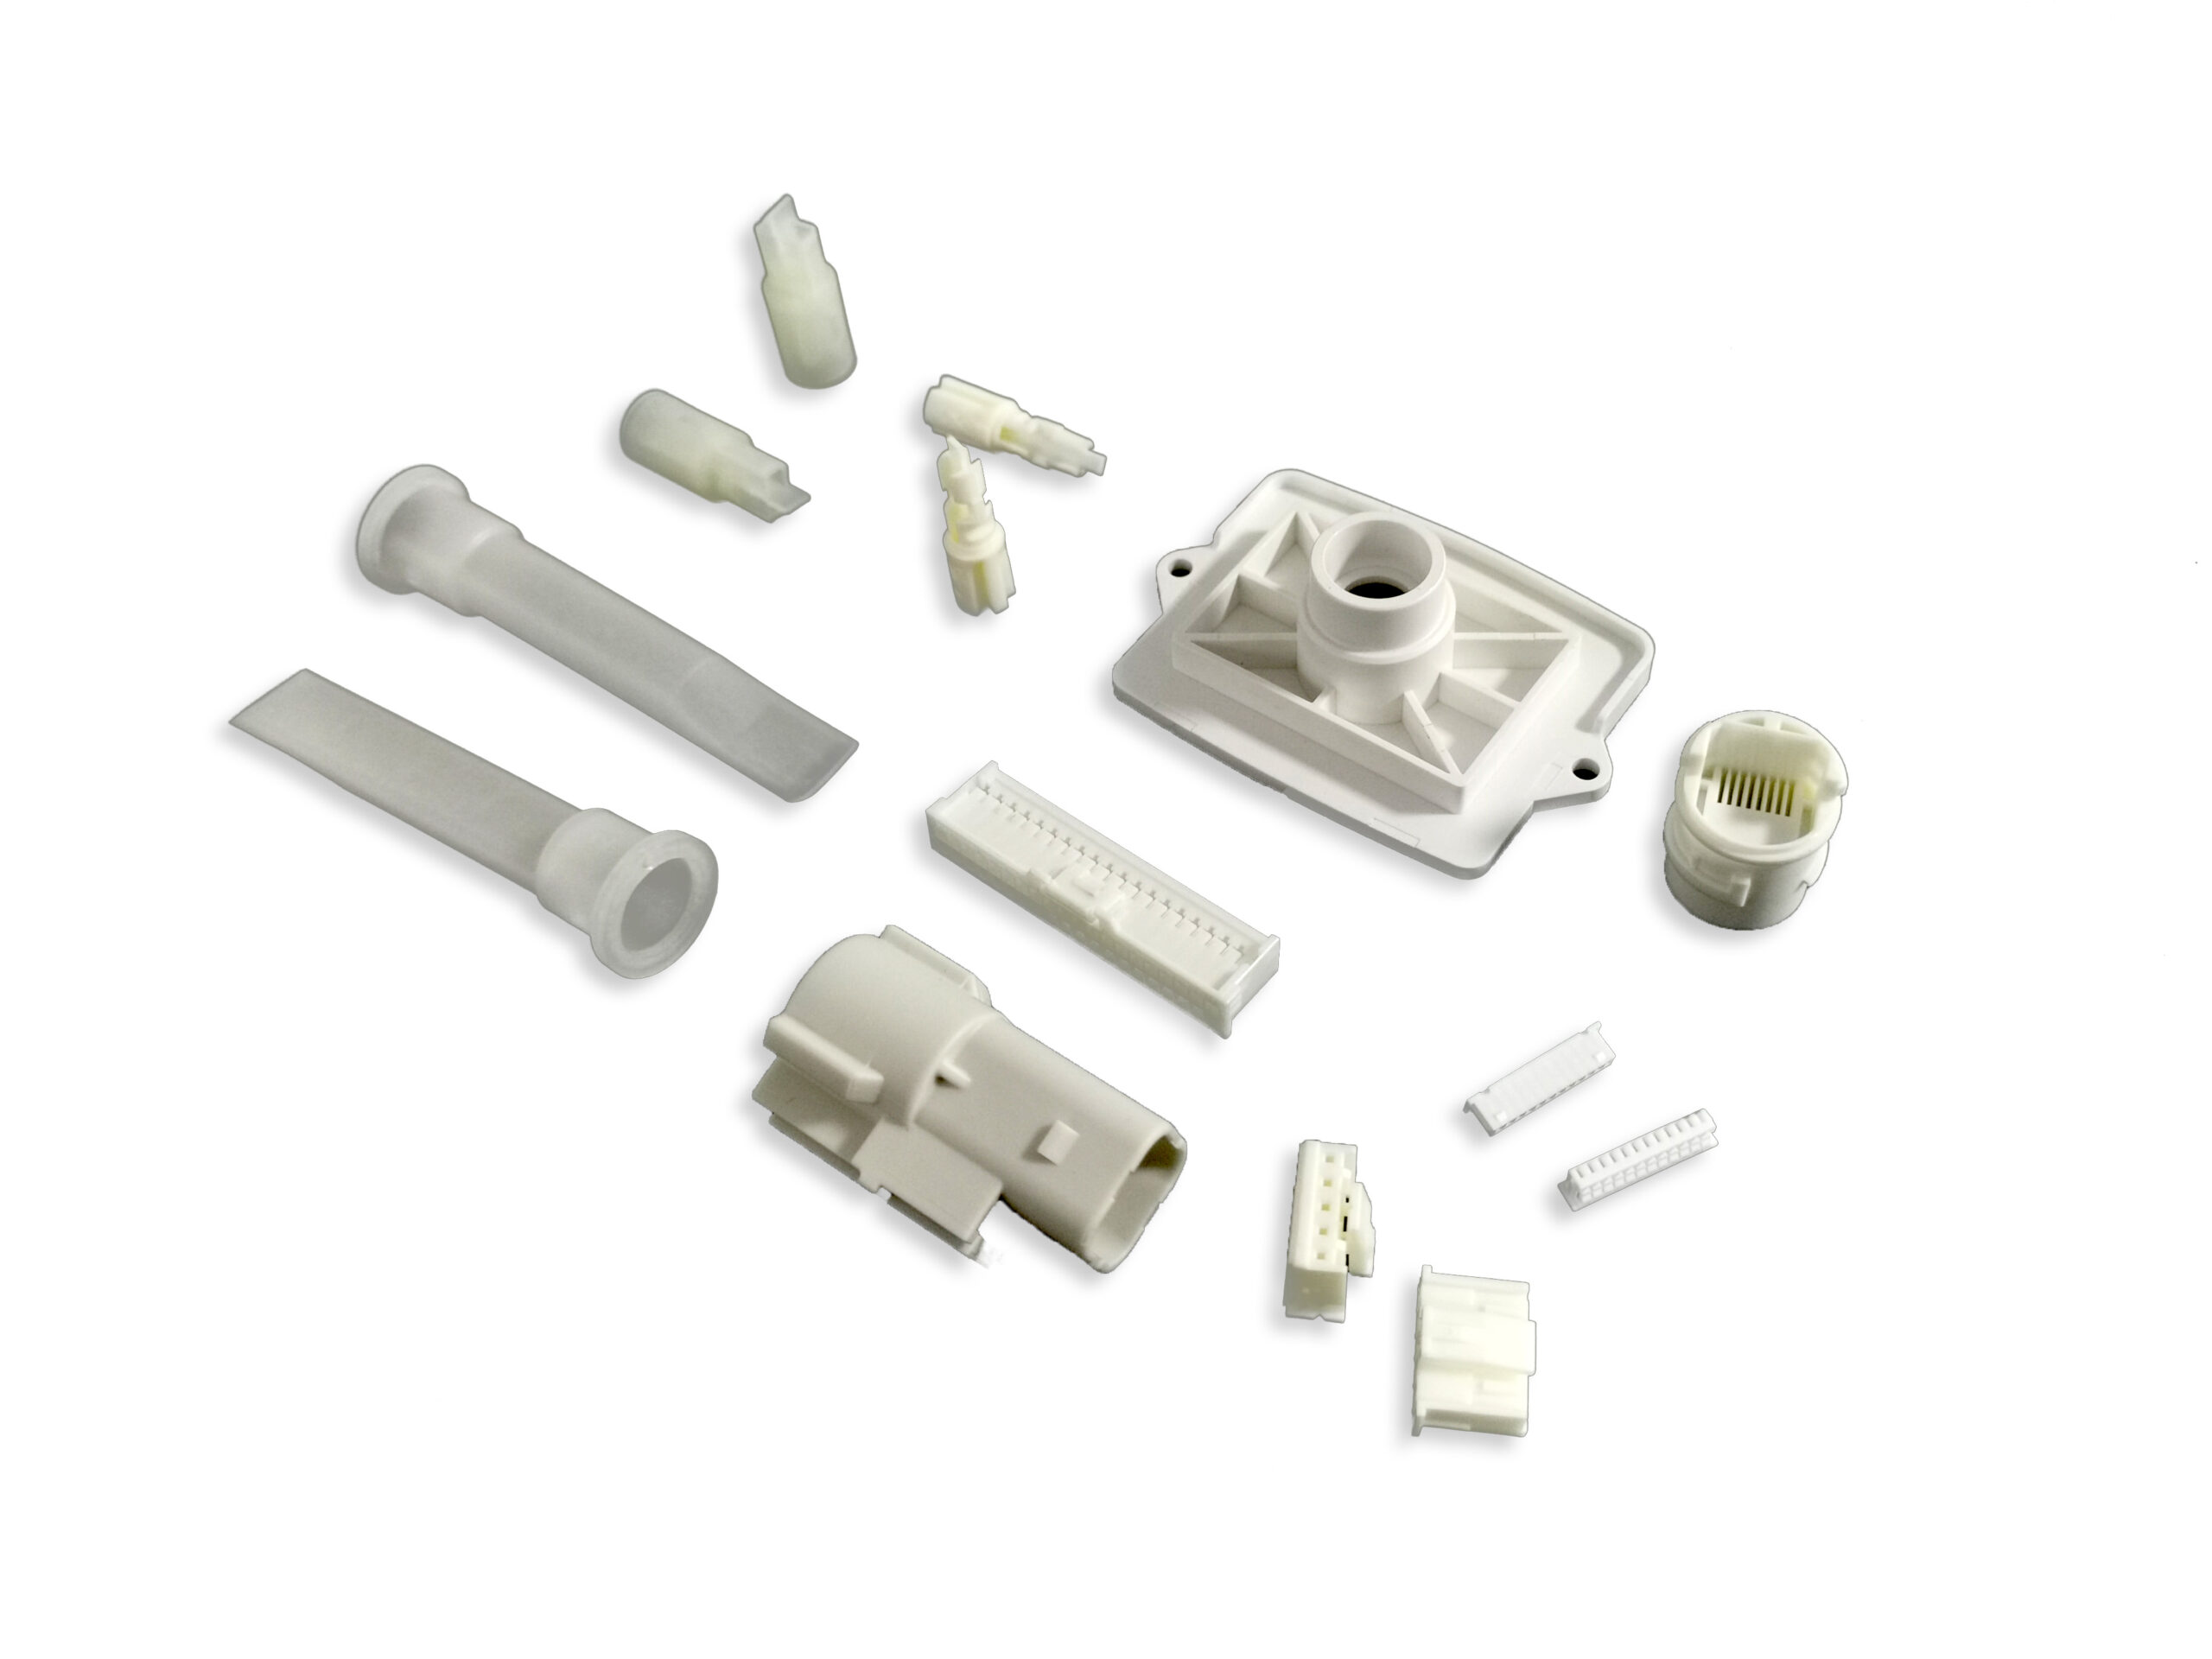 Chinese precise injection molding part supplier